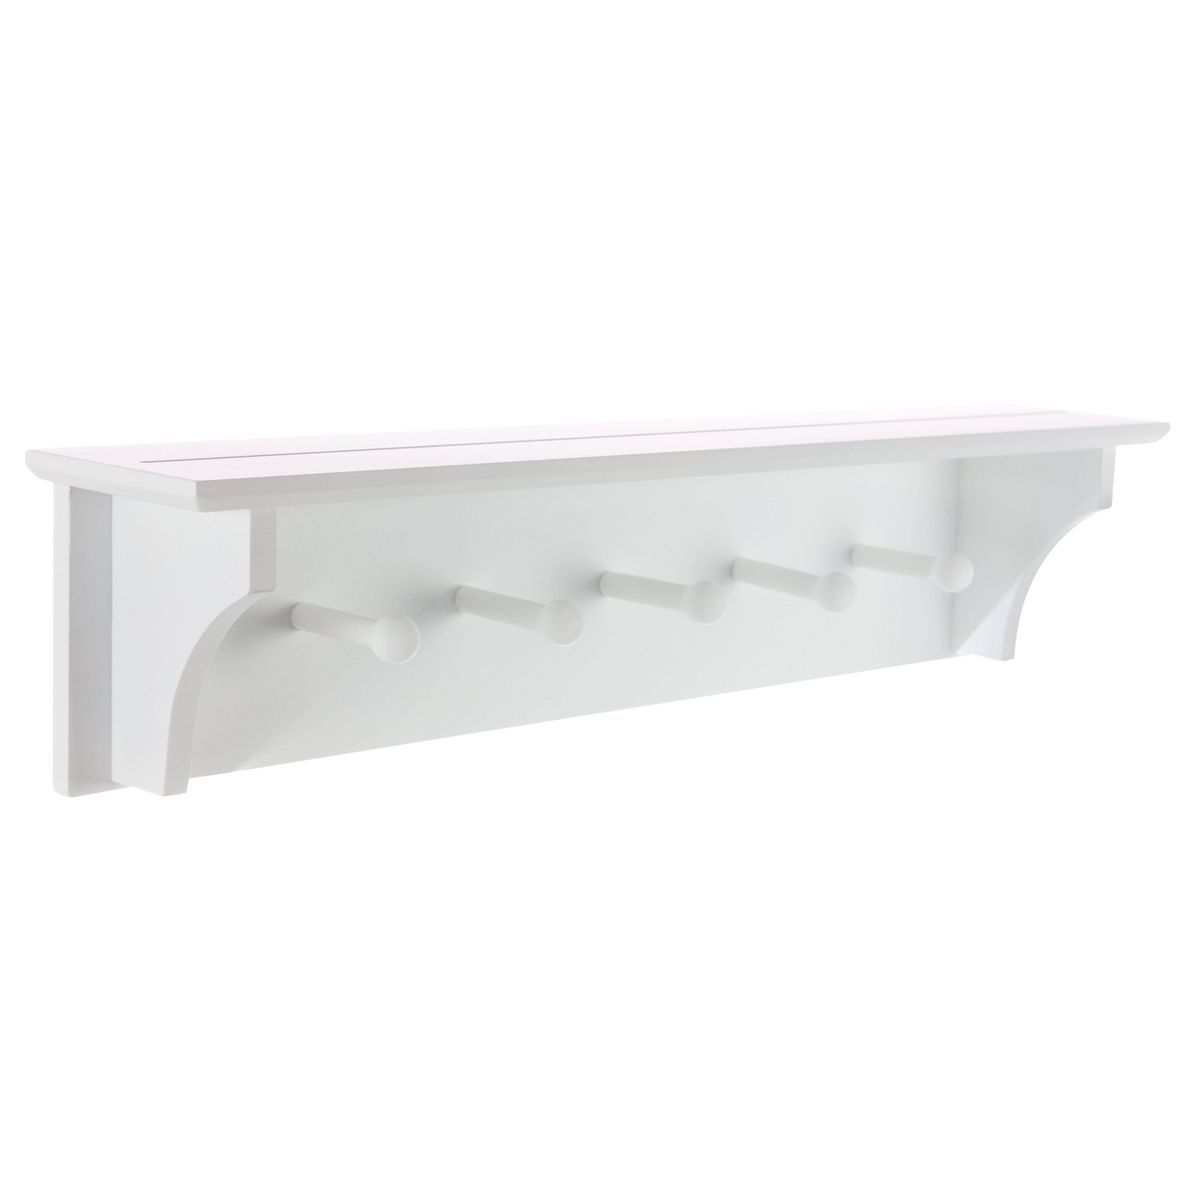 Foster Wall Shelf with Pegs - White | Target